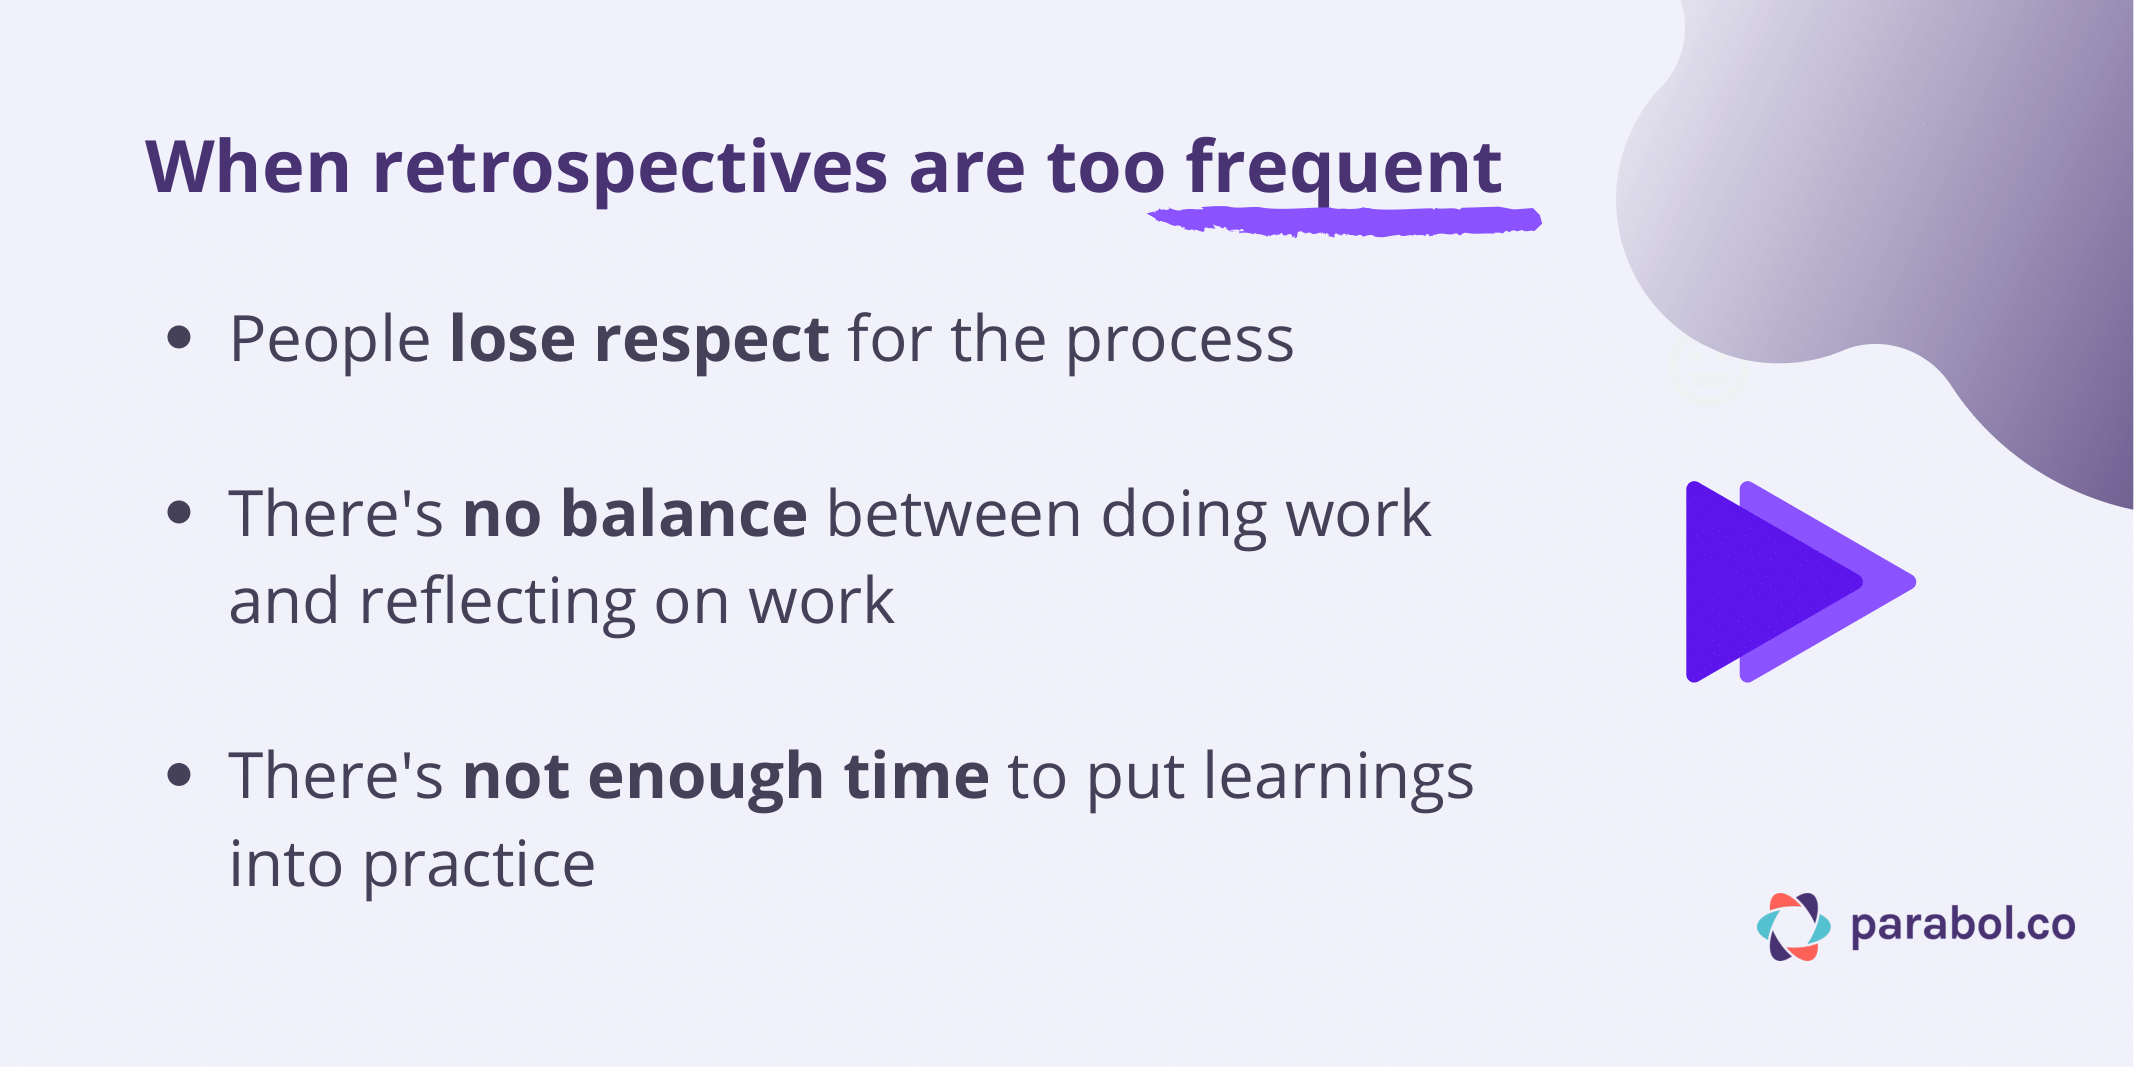 When retrospectives are too frequent people lose respect for the process, struggle to find balance and don't have enough time to put learnings into practice